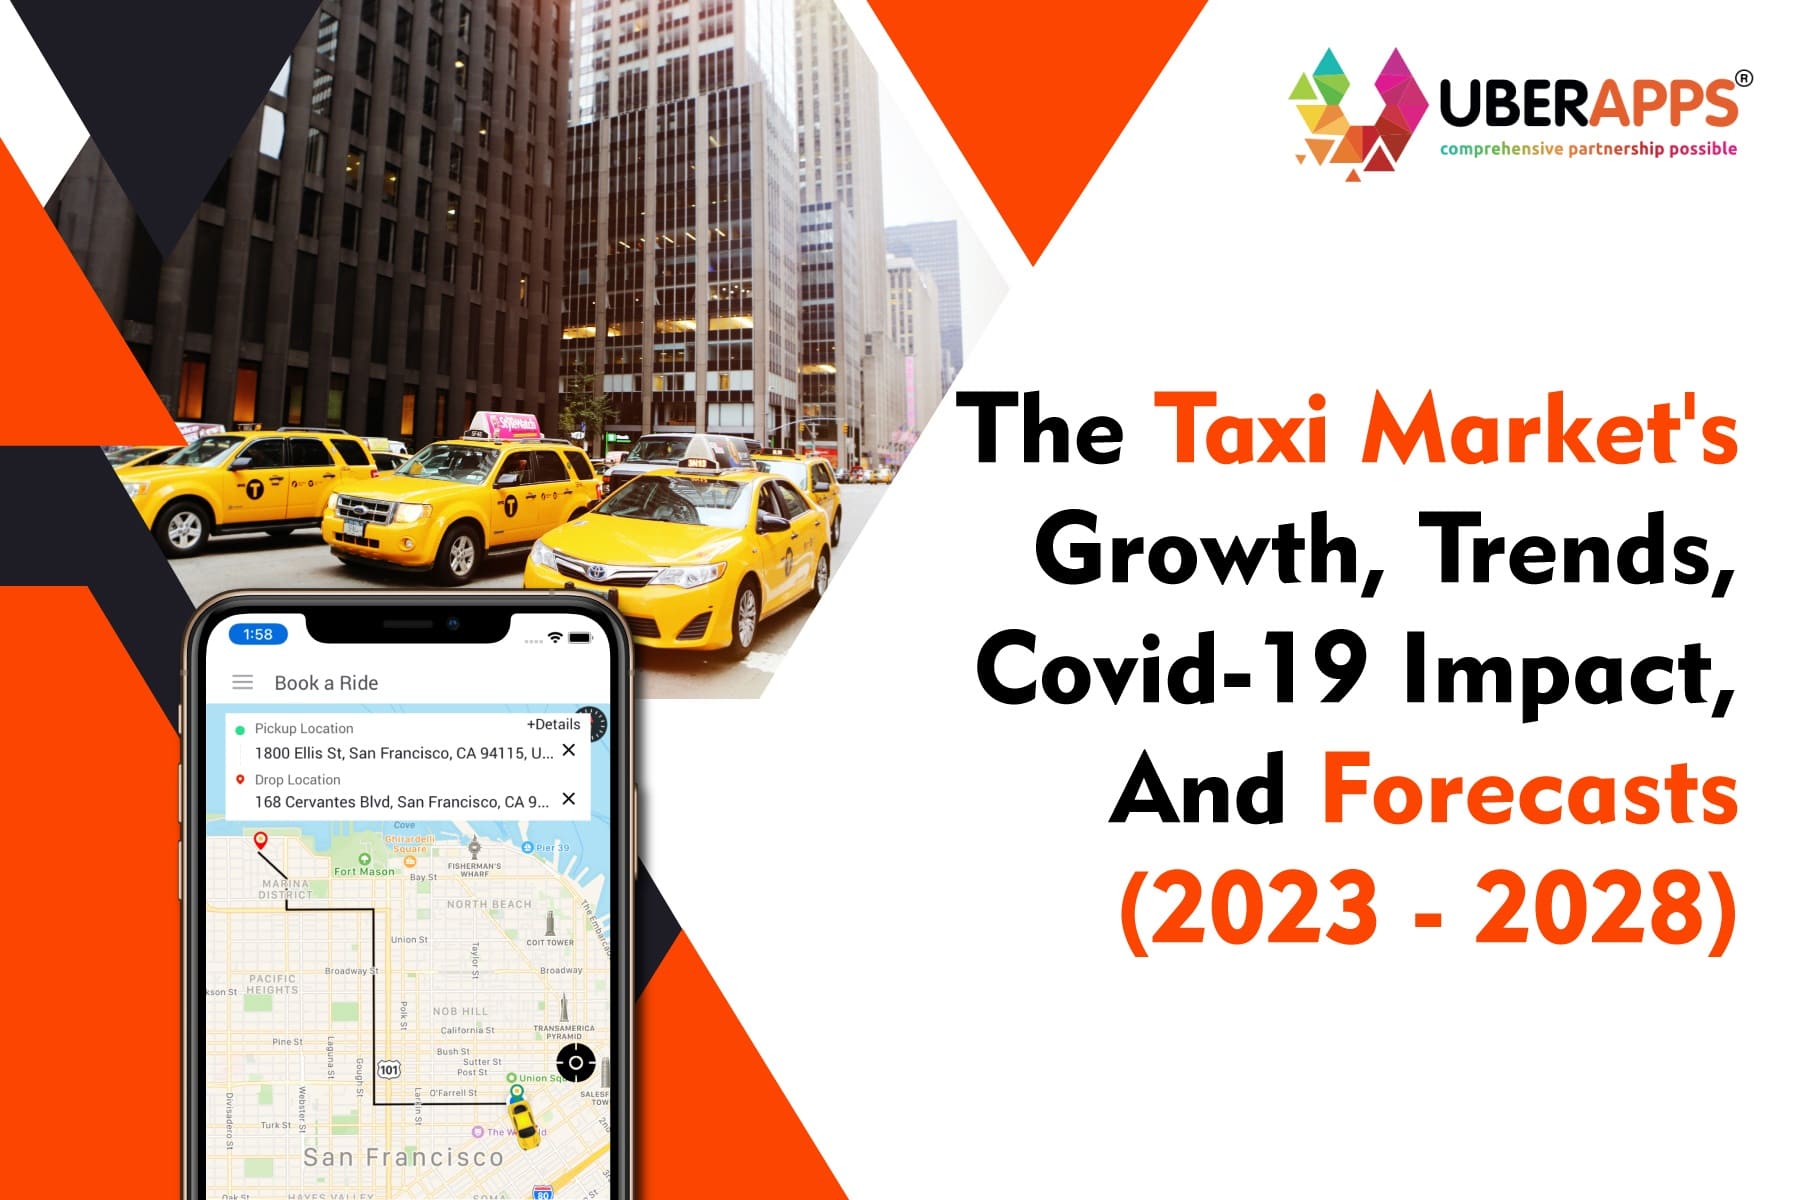 The Taxi Market's Growth